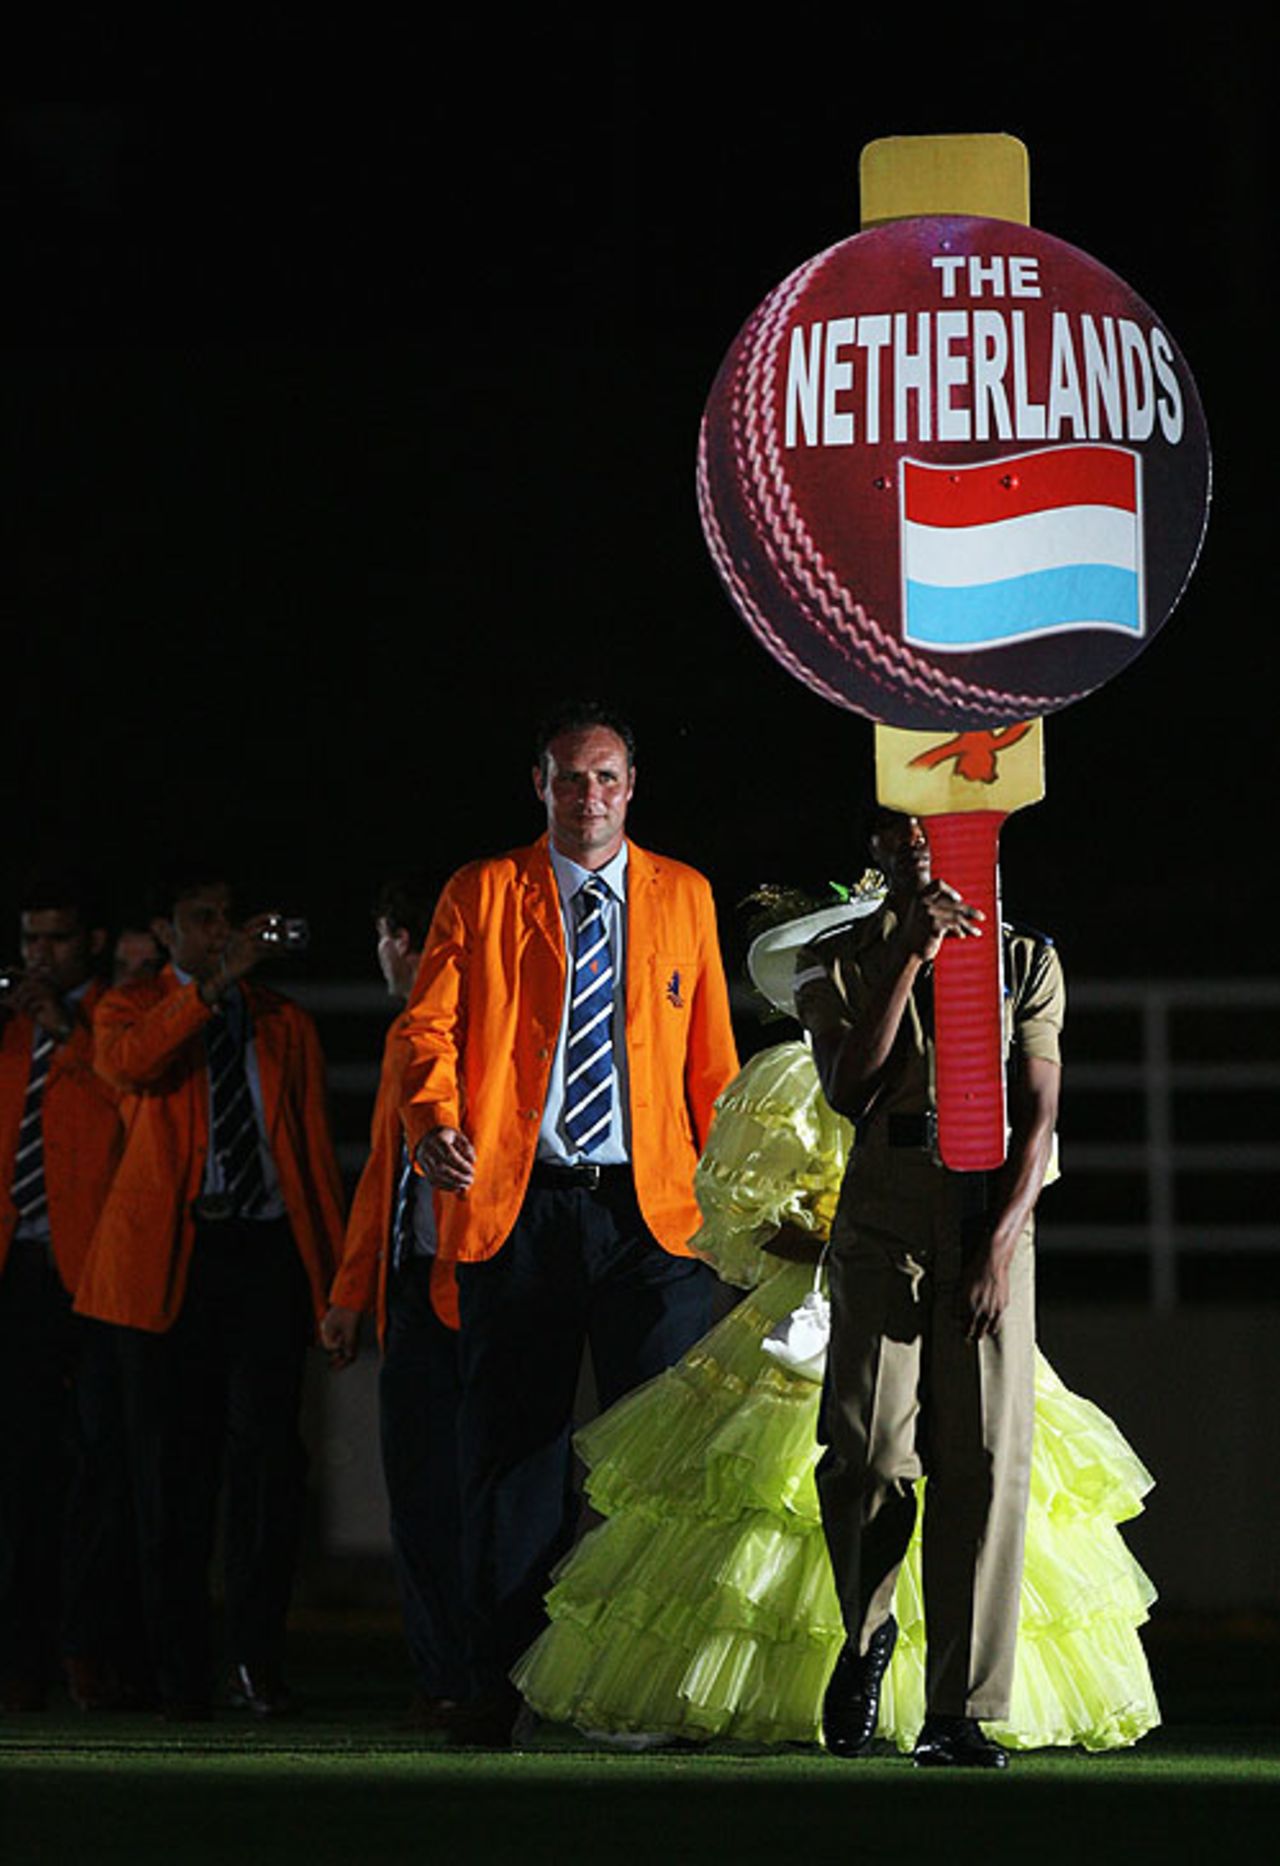 Luuk van Troost leads the Netherlands during the opening ceremony of the World Cup, Trelawny, March 11, 2007